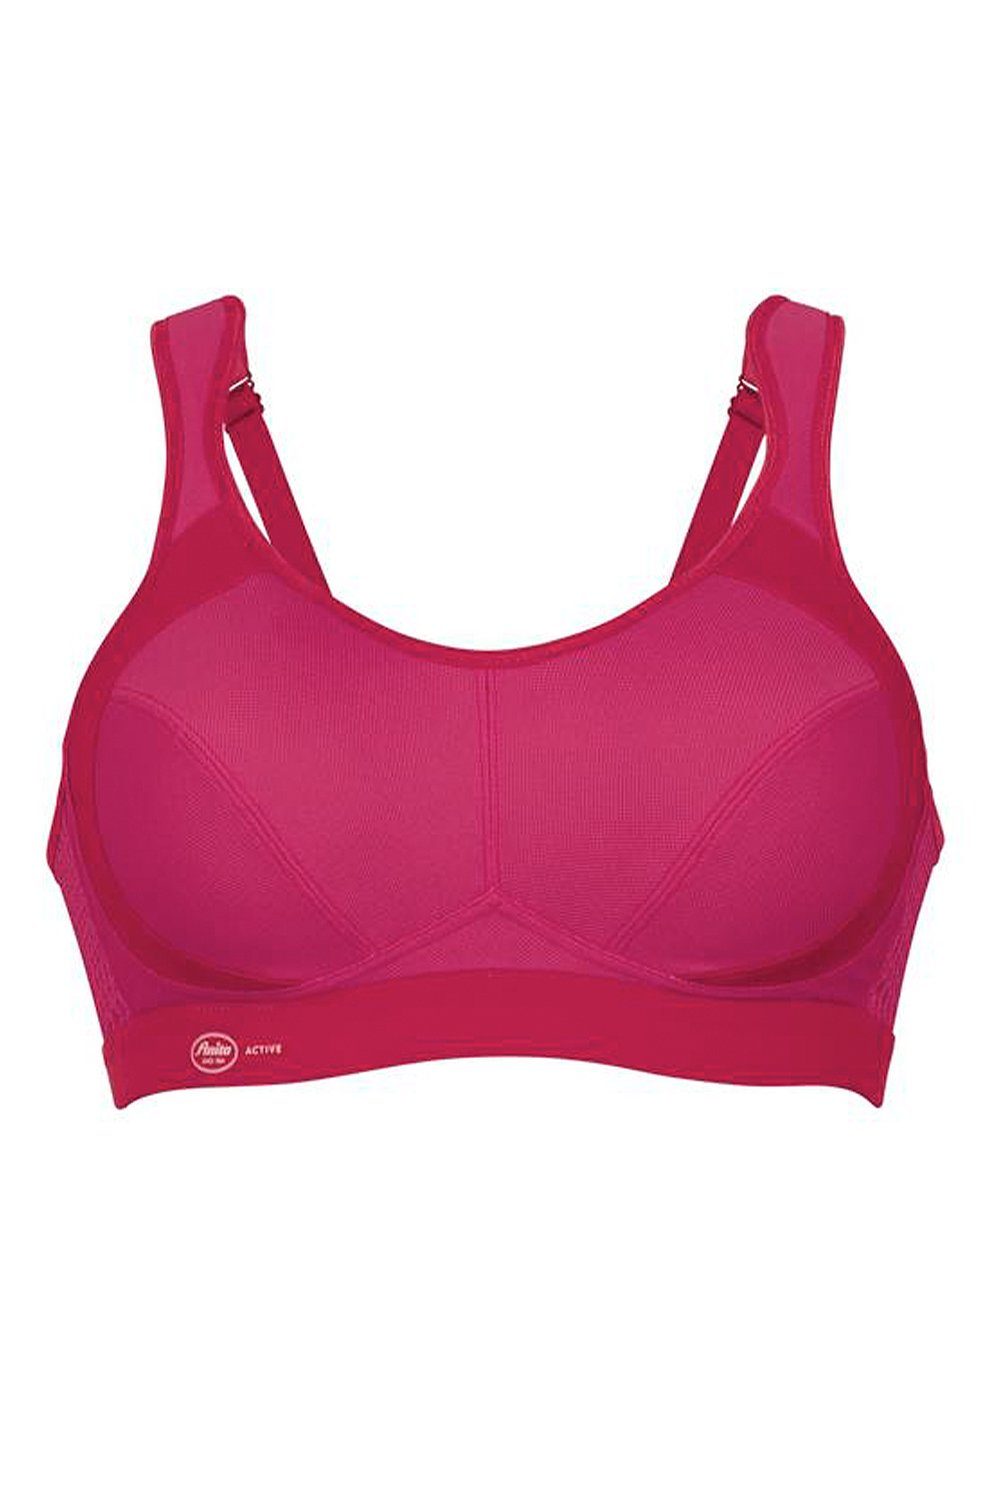 Anita Active Sport-BH Sport-BH, extreme control - maximum support 5527 candy red